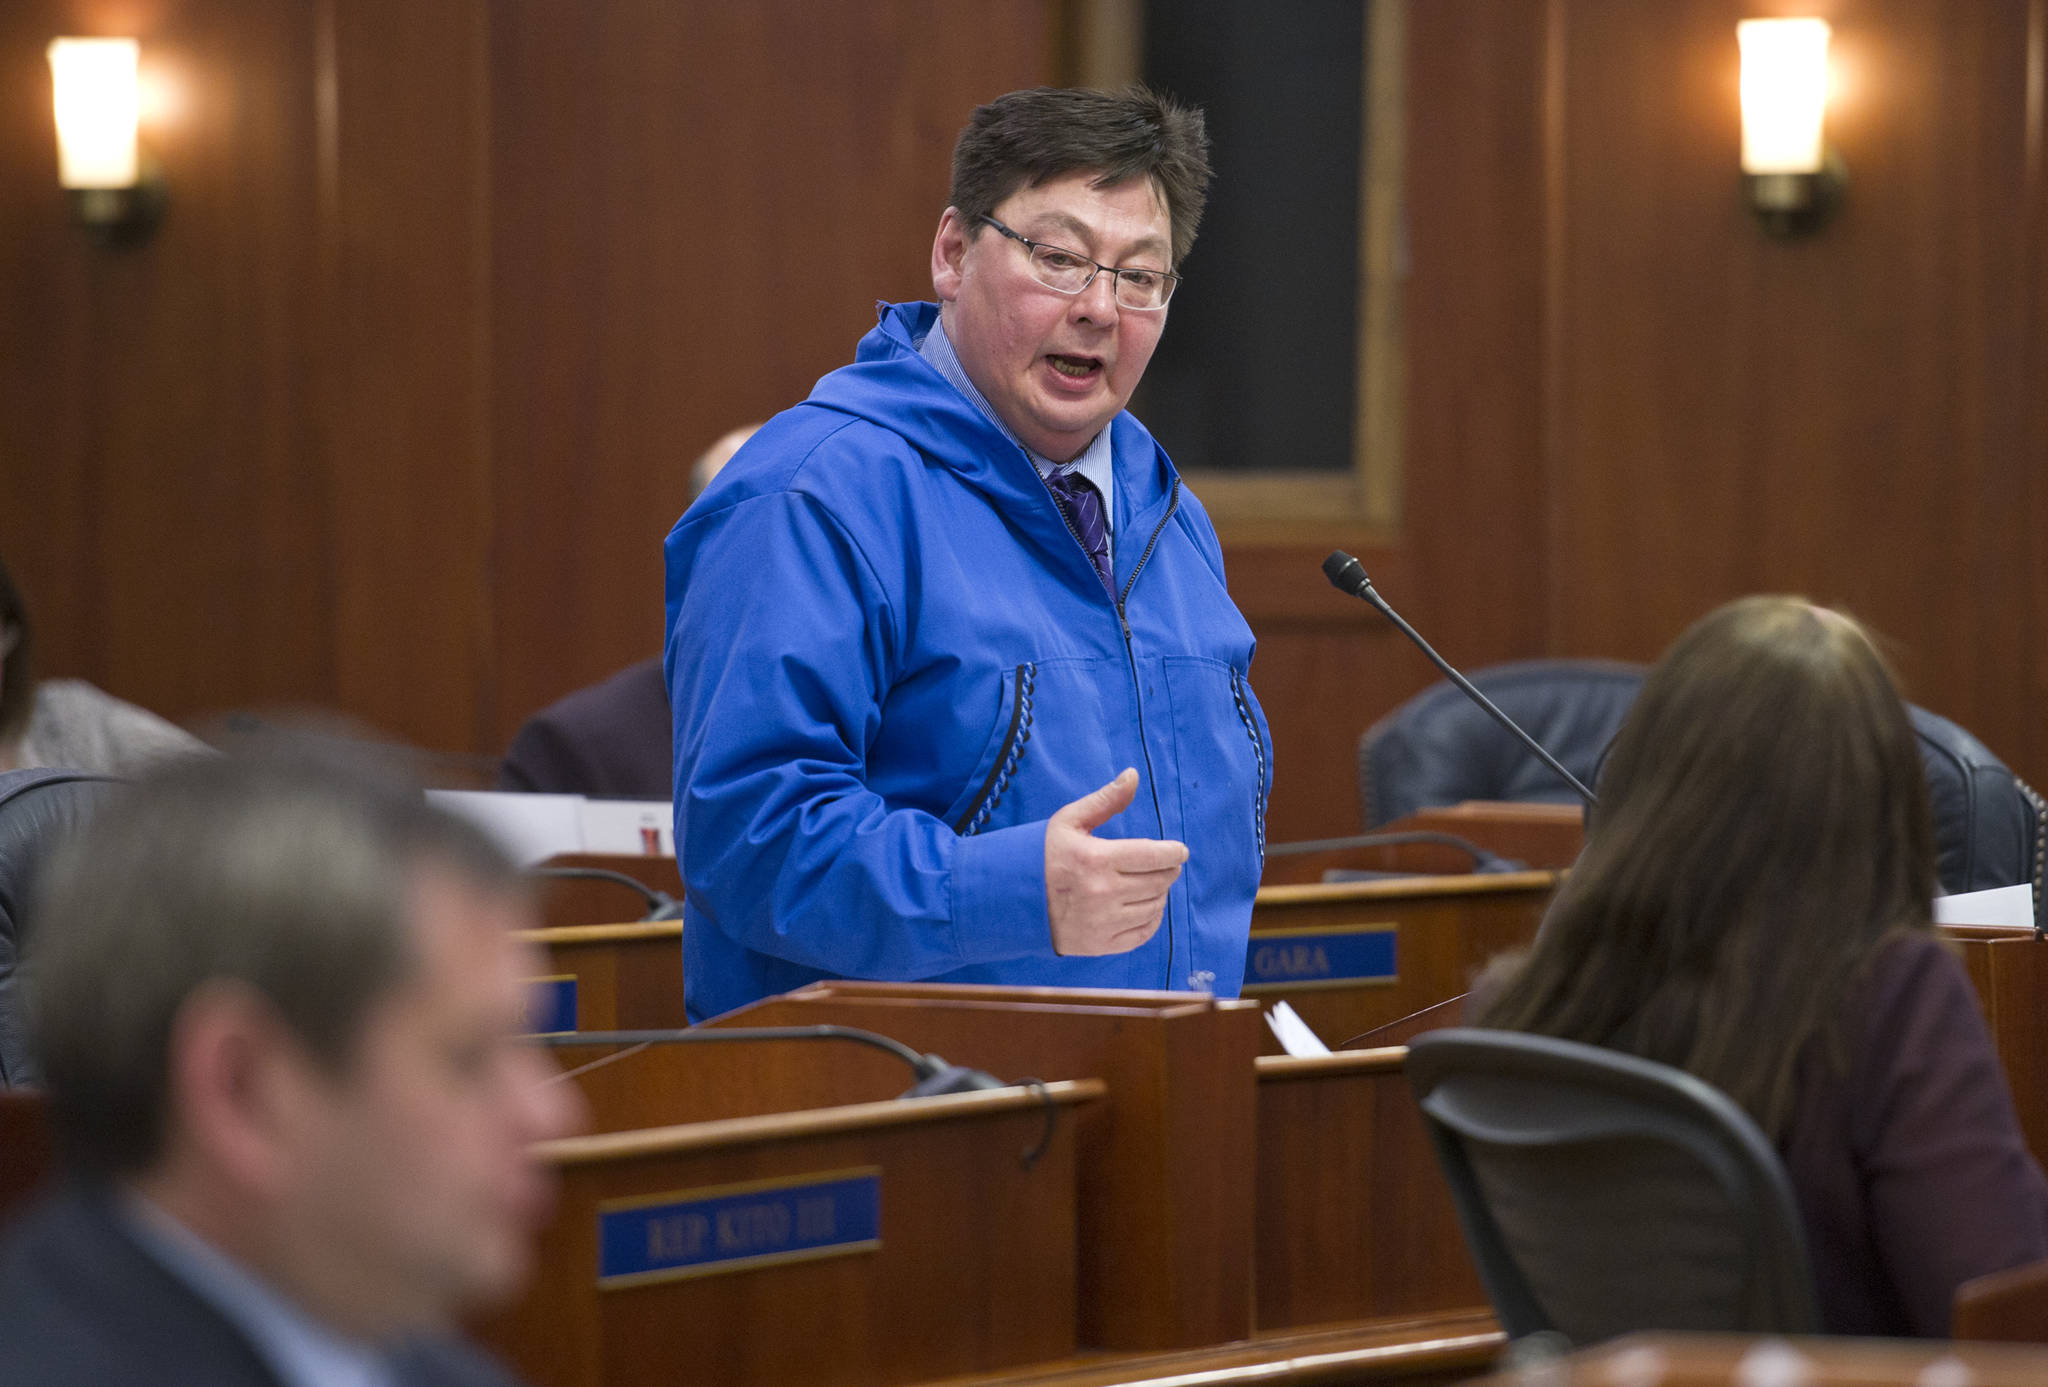 Rep. Dean Westlake, D-Kiana, speaks in favor of drilling in the Arctic National Wildlife Refuge in February 2017. After being accused of sexual harassment by many women, Westlake resigned Friday. (Michael Penn | Juneau Empire file)